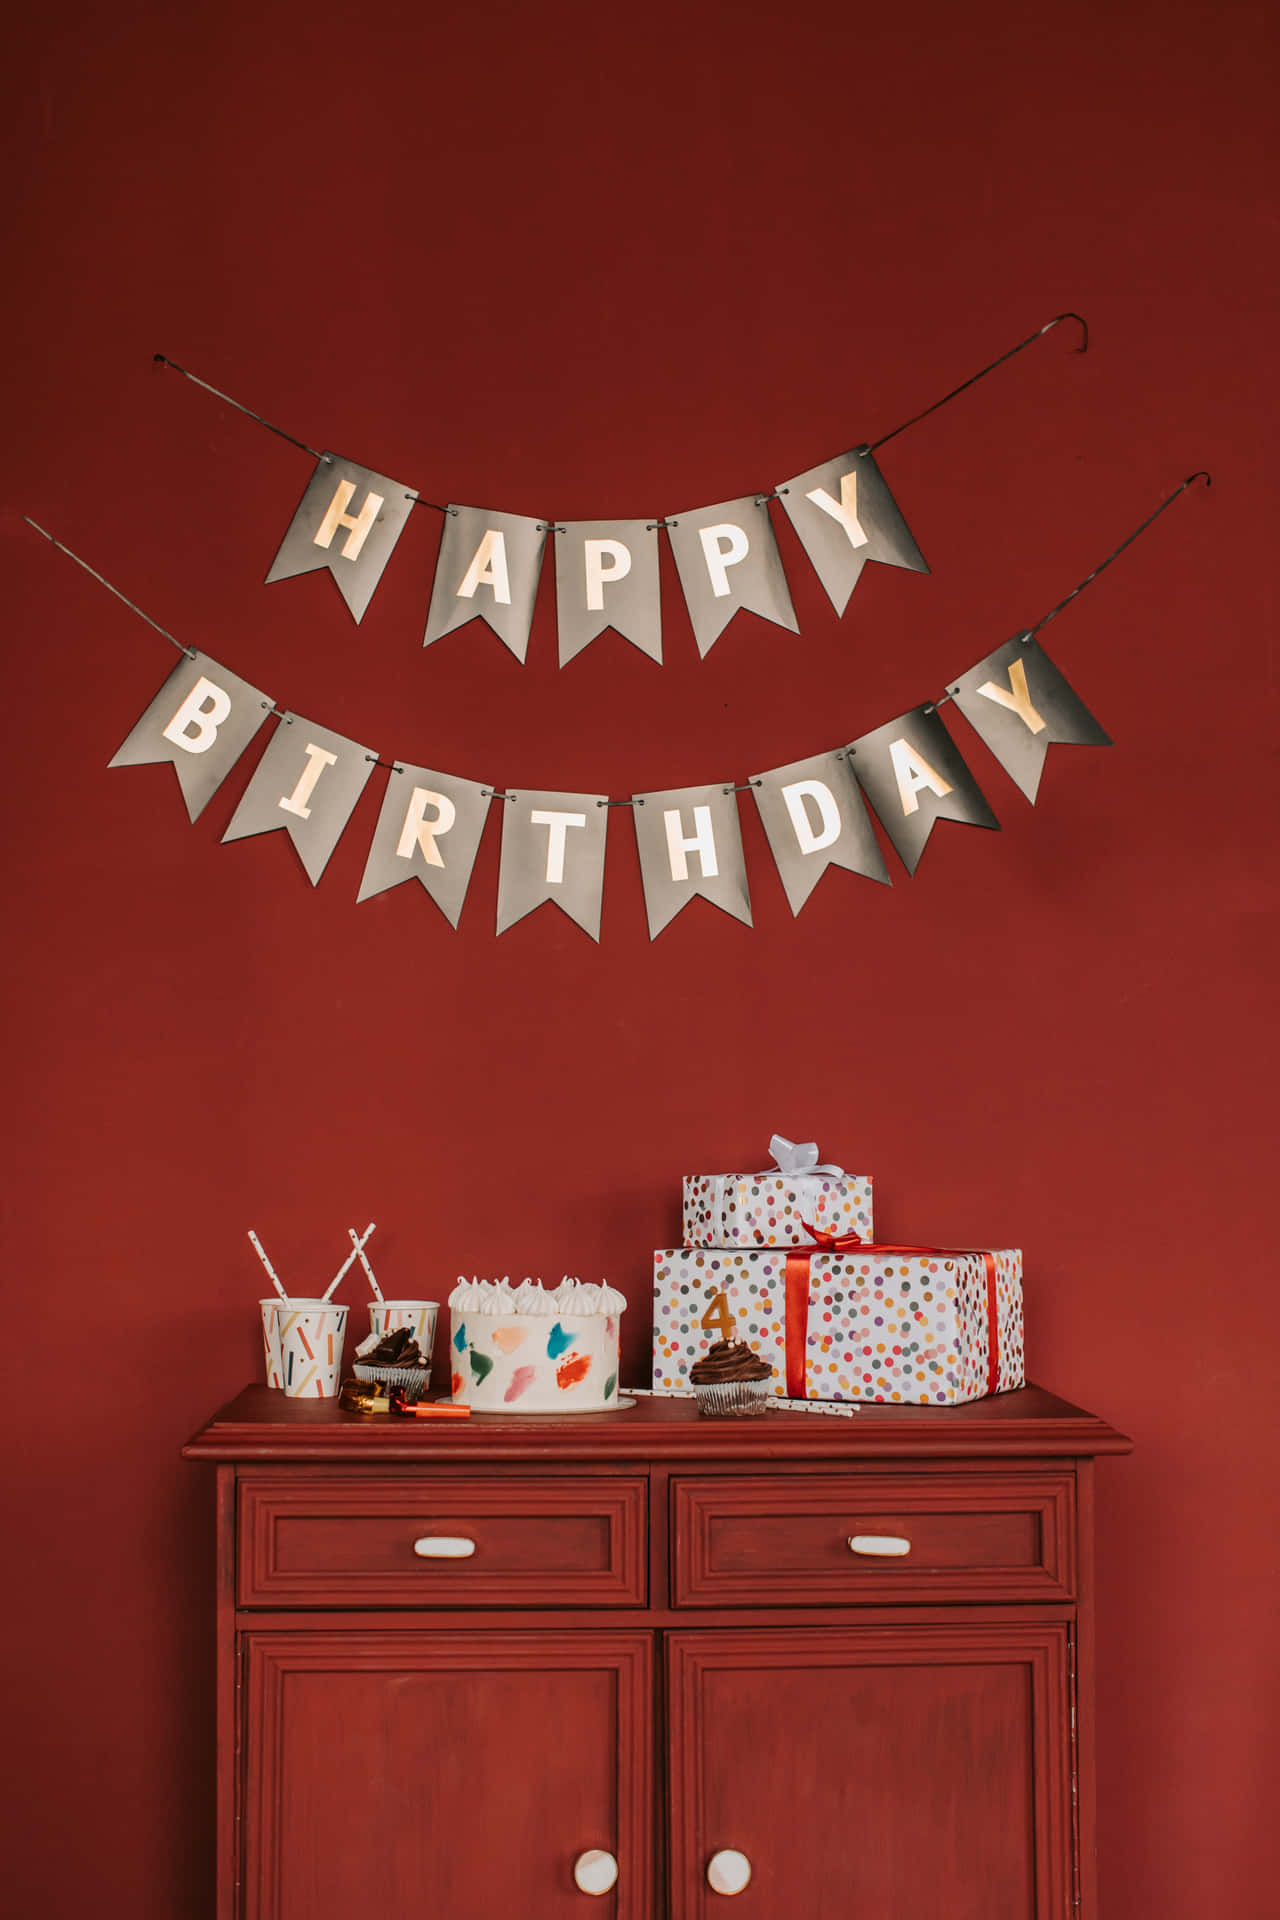 Celebrate with adorable birthday wishes! Wallpaper